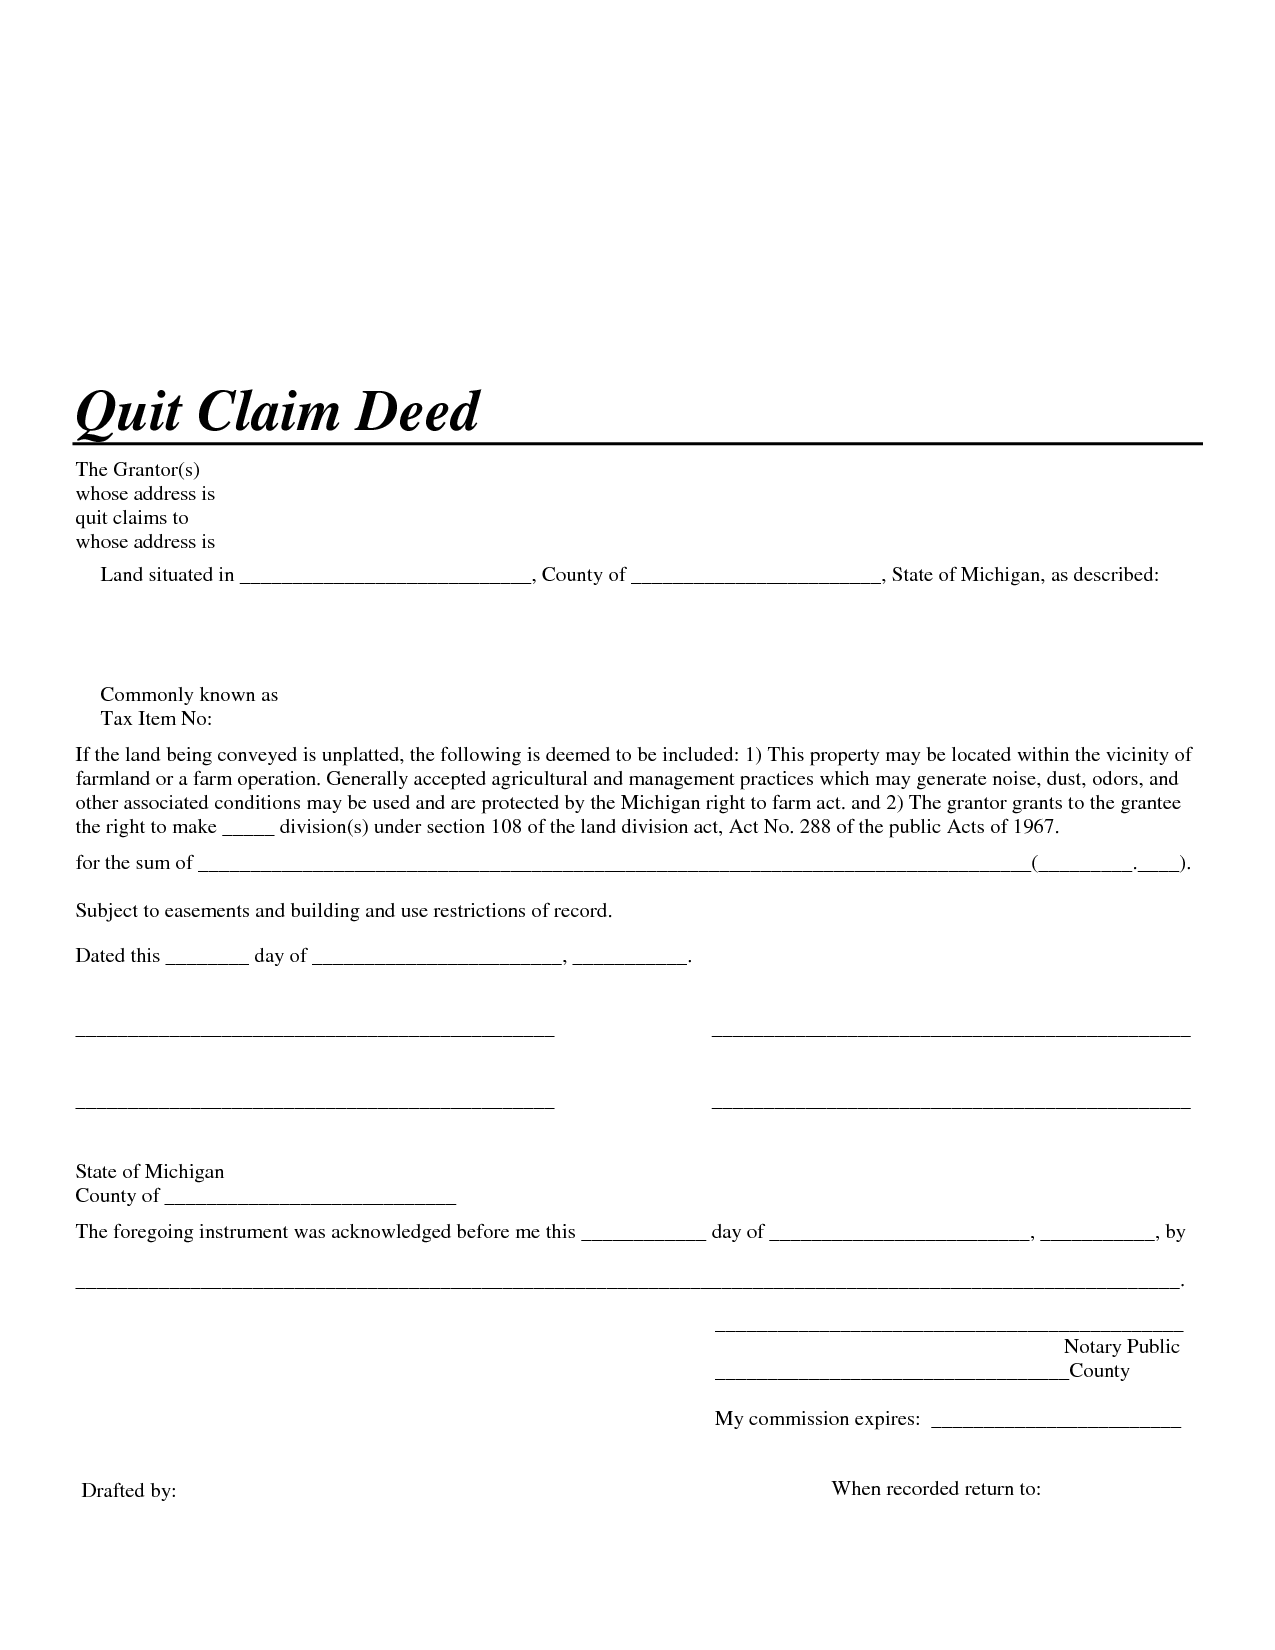 Quit Claim Deed Sample Free Printable Documents 38916 | Hot Sex Picture